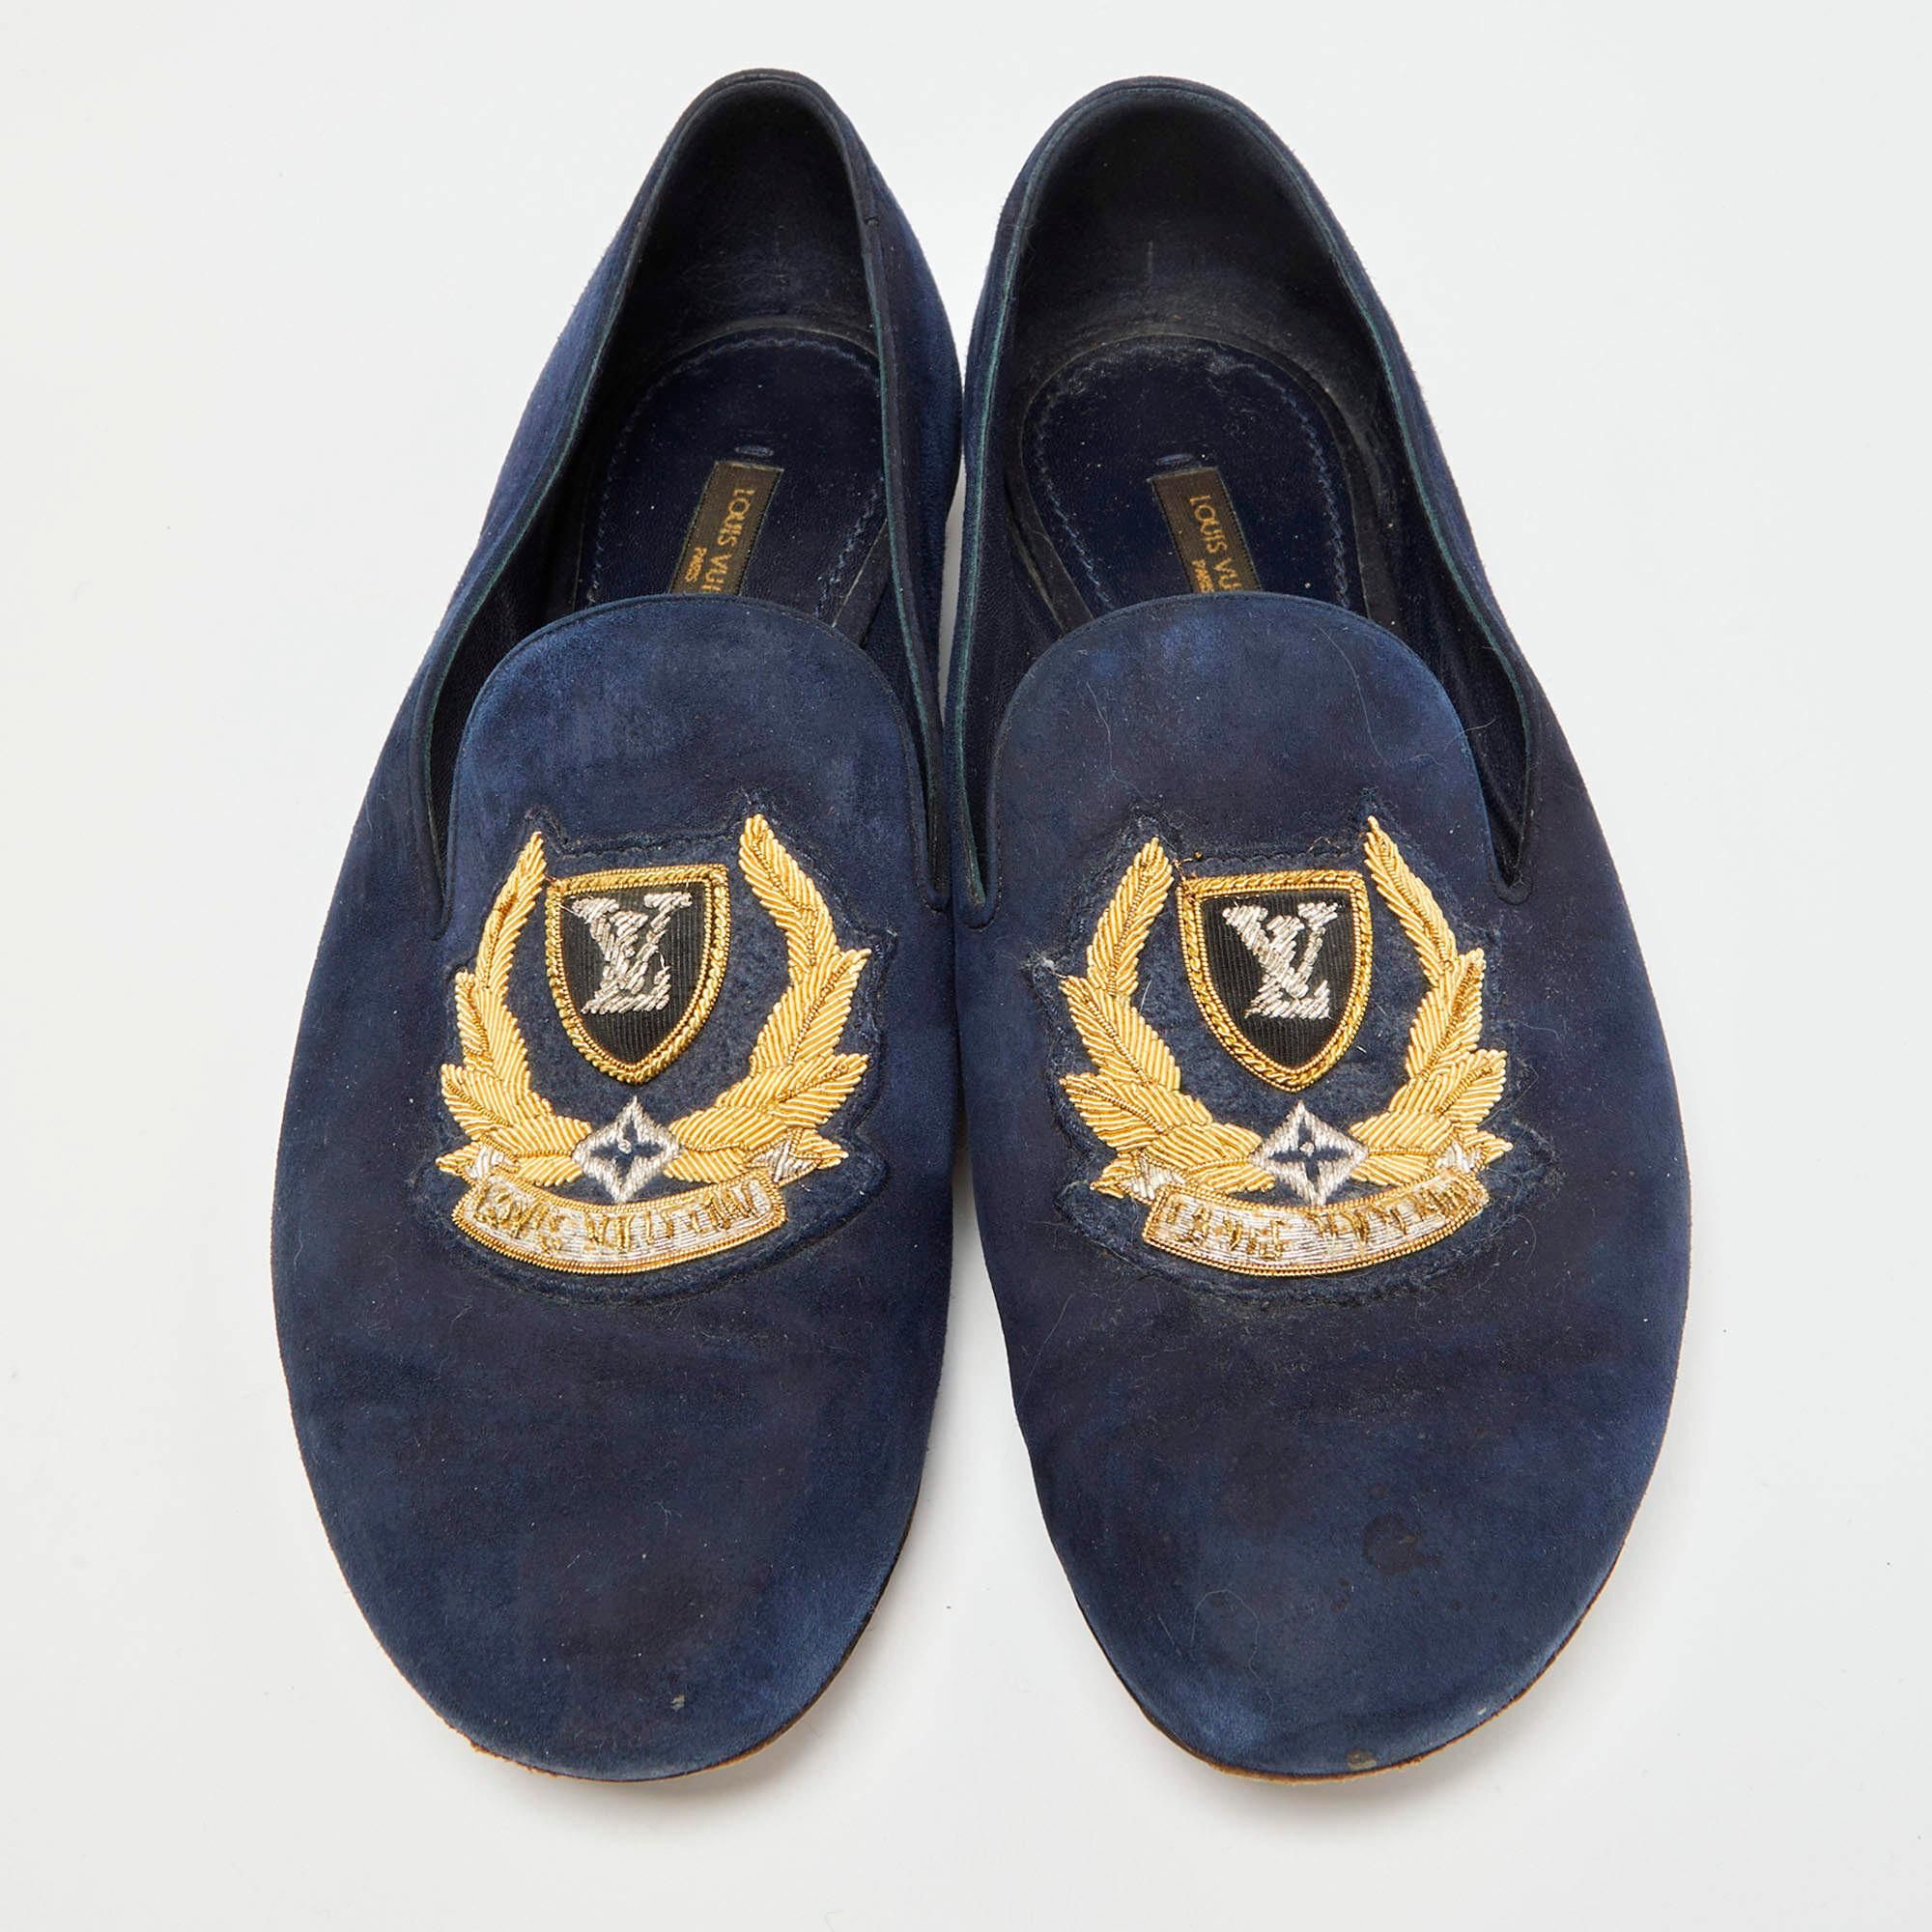 Coming from one of the most celebrated fashion house, these smoking slippers are known for their brilliant craftsmanship. A seamless mix of comfort and style, these smoking slippers will add a refined touch to your ensemble without too much effort.

